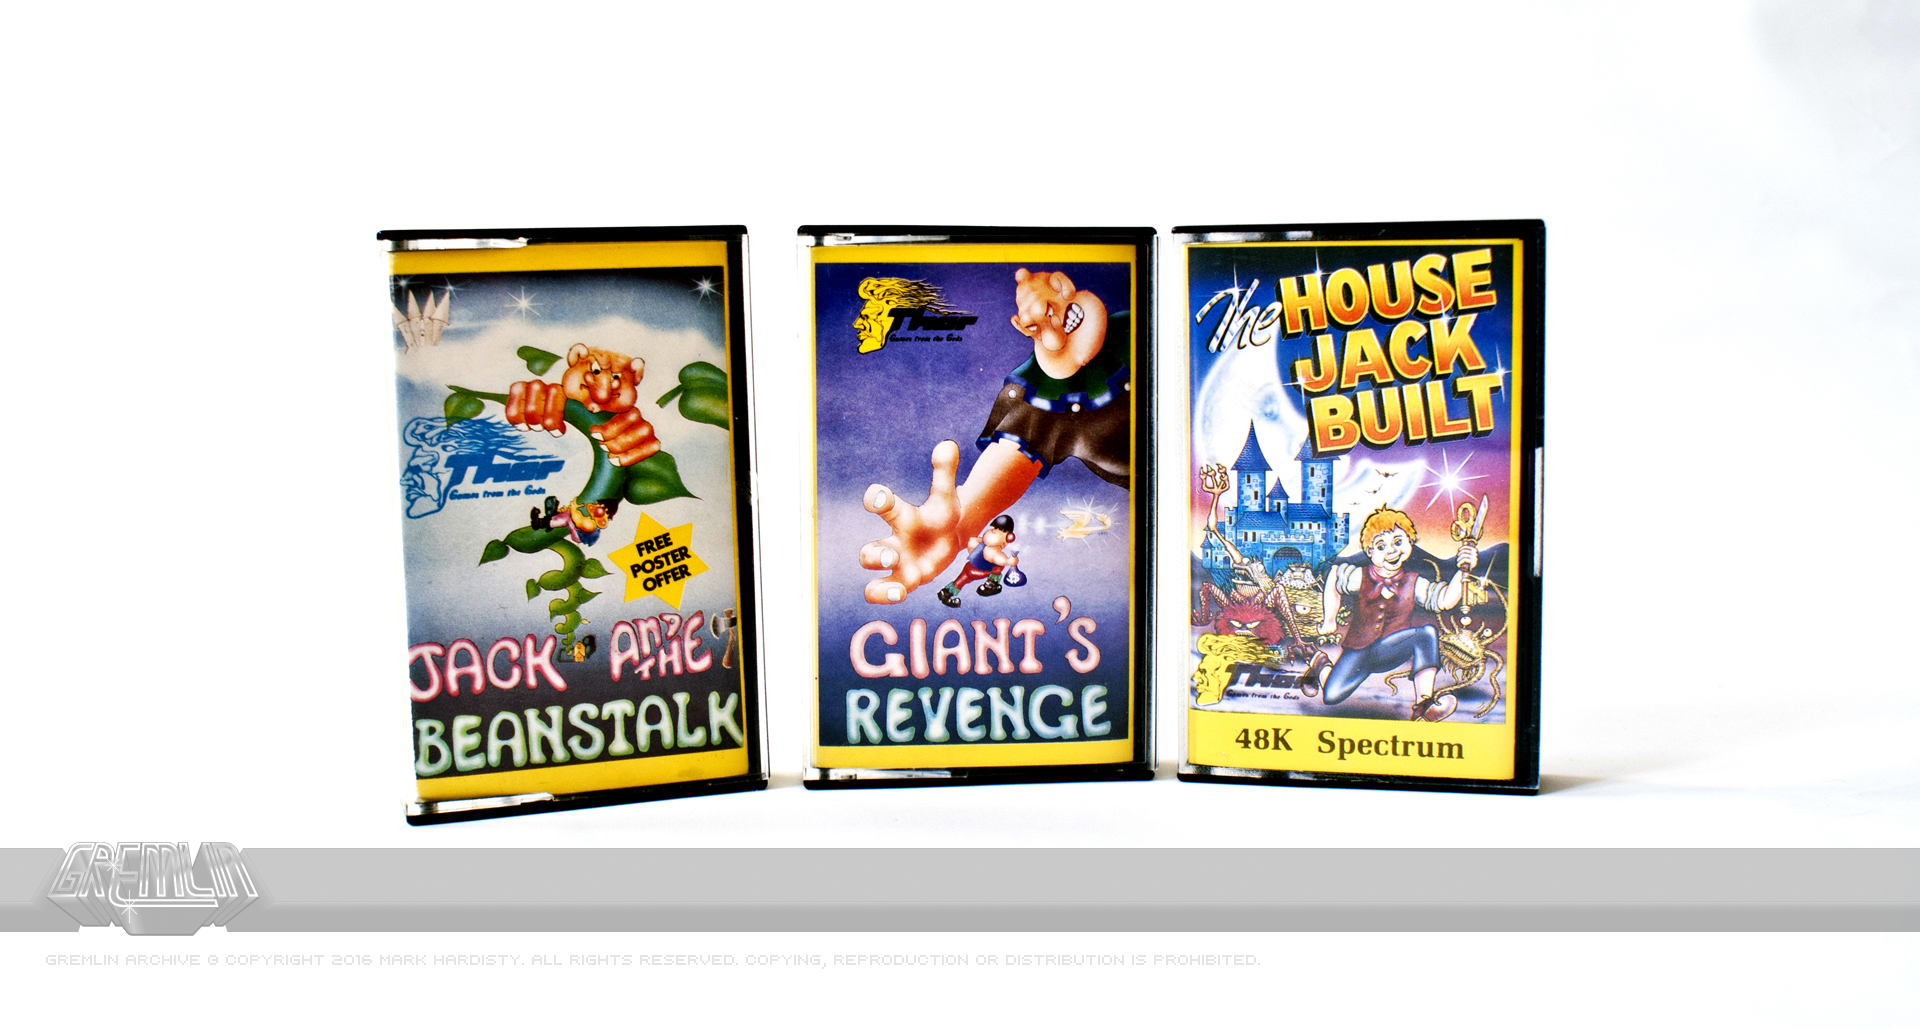 Chris Kerry – Jack and the Beanstalk Trilogy